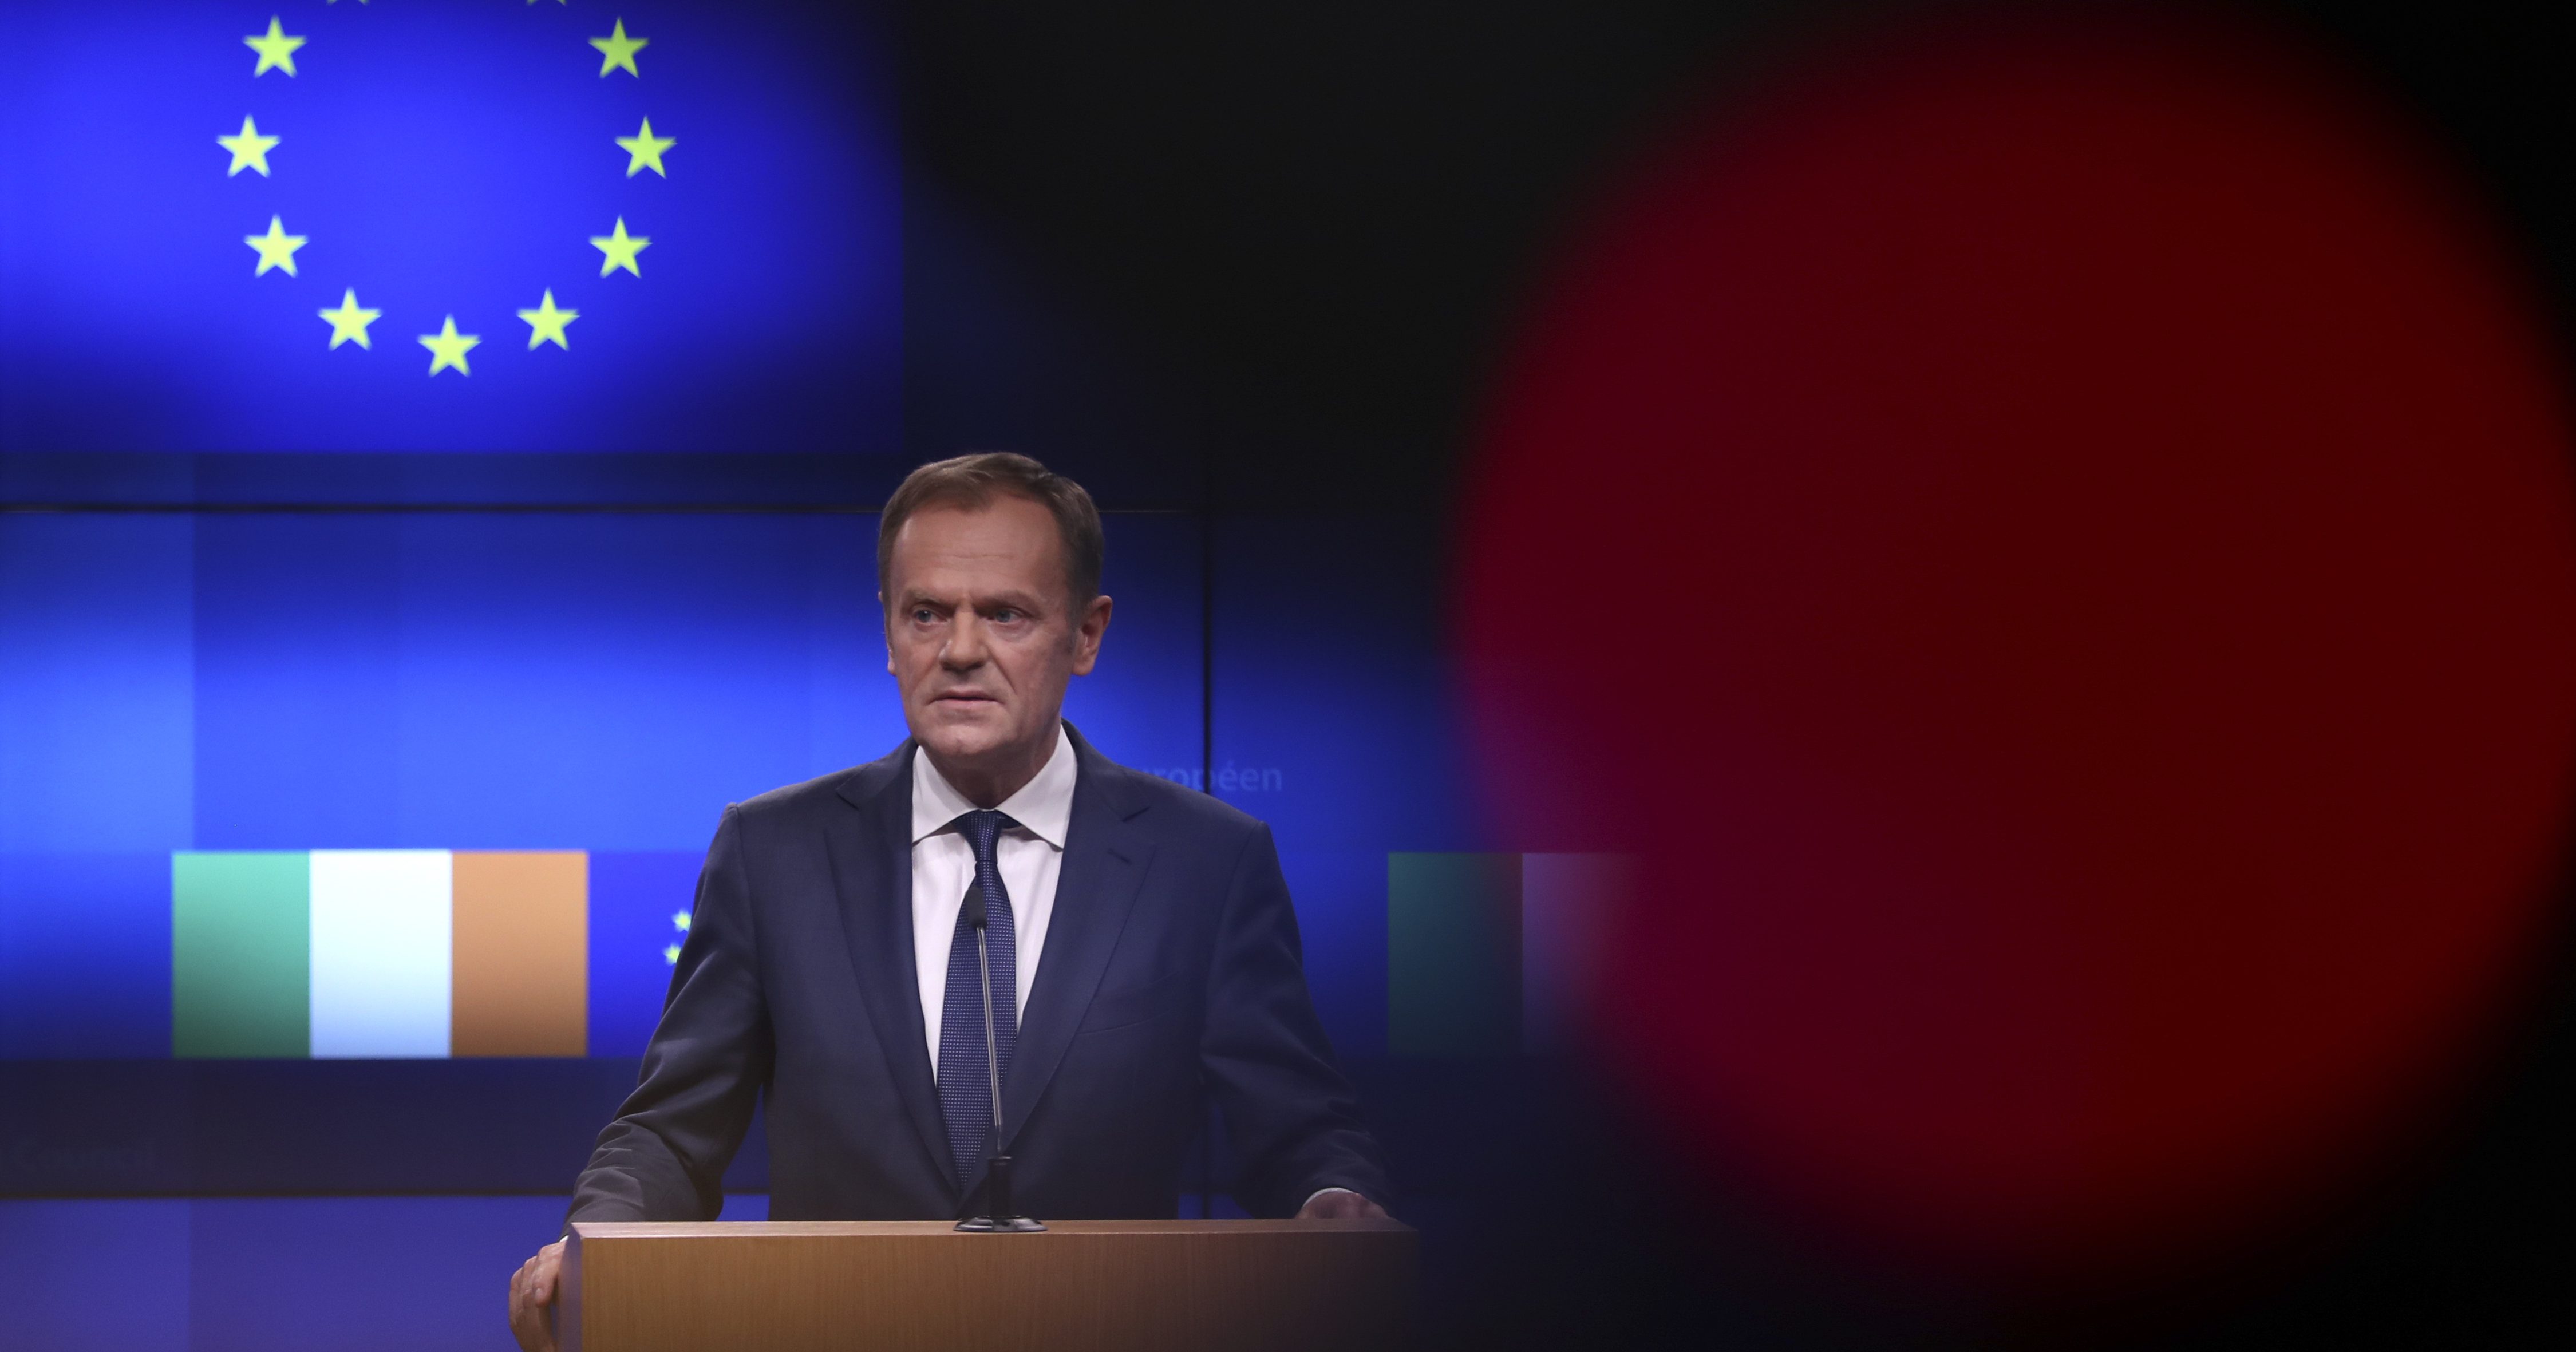 European Council President Donald Tusk makes a joint statement with Irish Prime Minister Leo Varadkar following their meeting at the Europa building in Brussels on Wednesday.